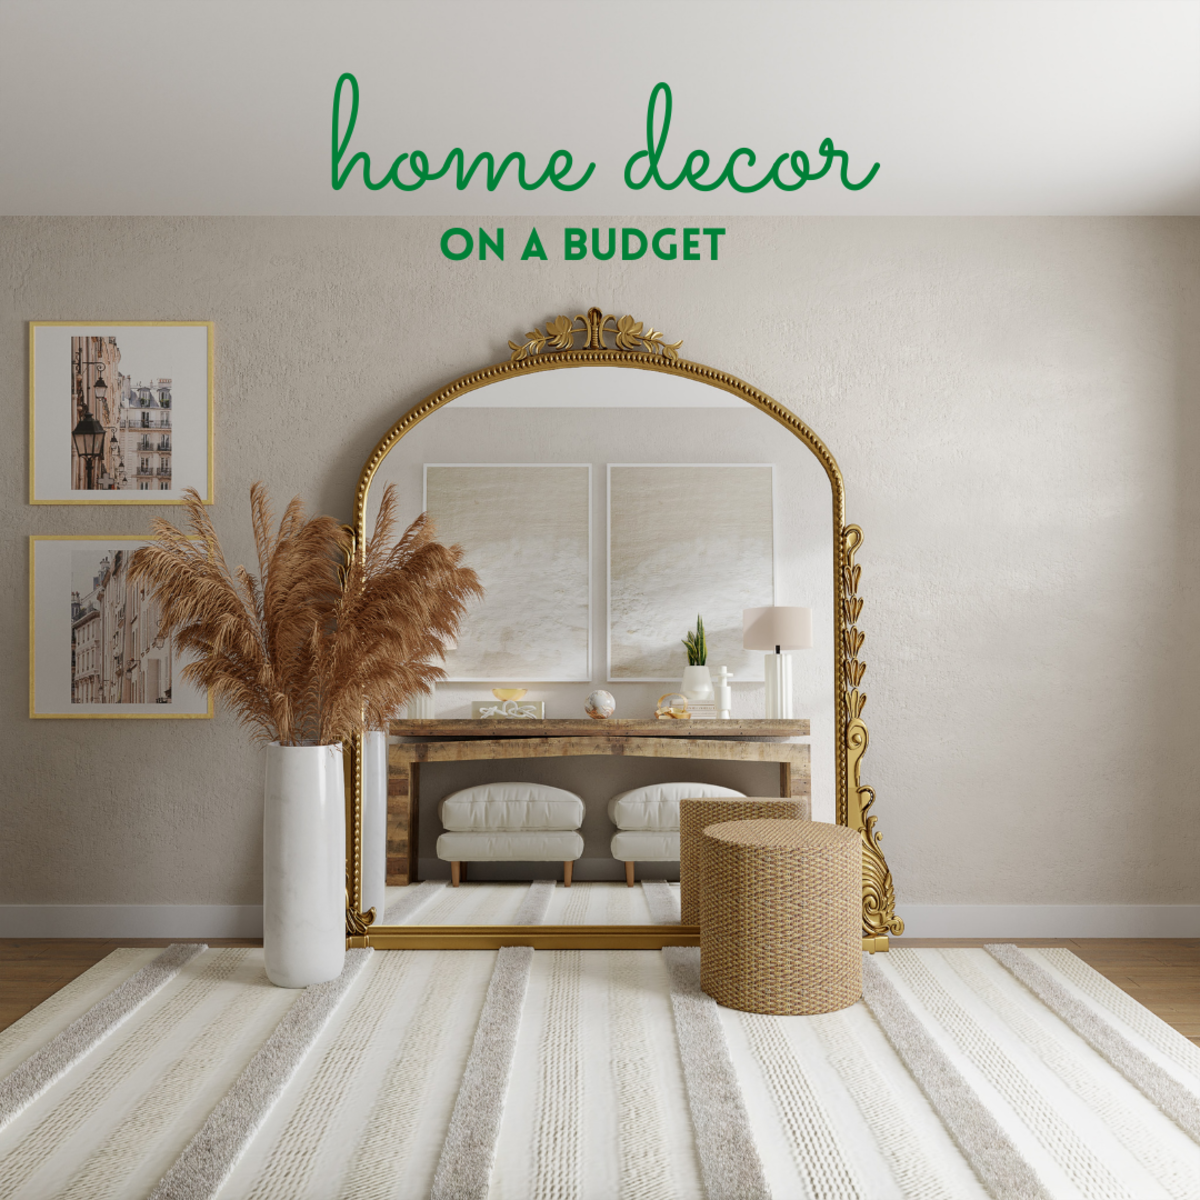 You don't need to break the bank to decorate your home in style!